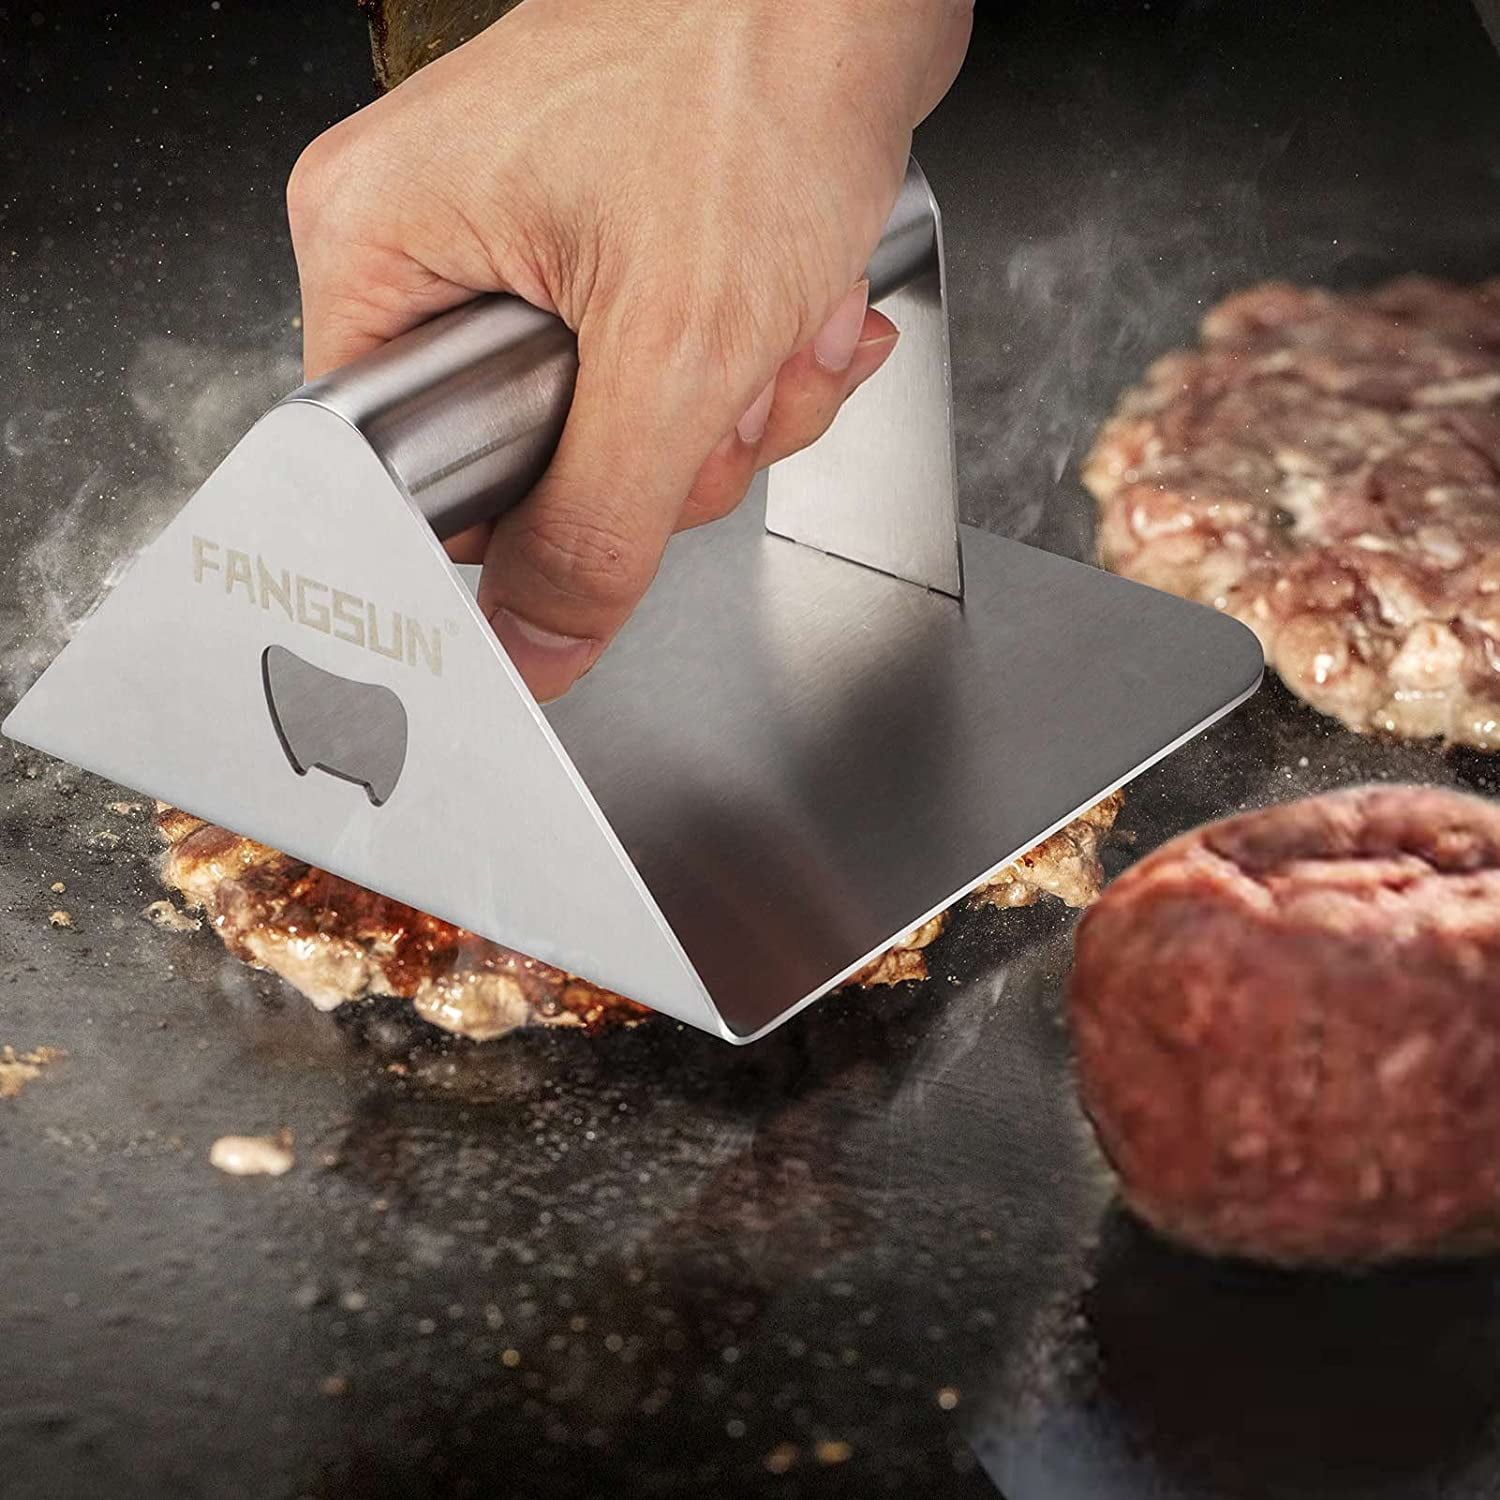 PMYEK Smash Burger Press with Anti-Scald Handle, 5.5 Inch Hamburger Smasher  Tool, Meat Bacon Grill Tortilla Press, Patty Maker, Professional Griddle